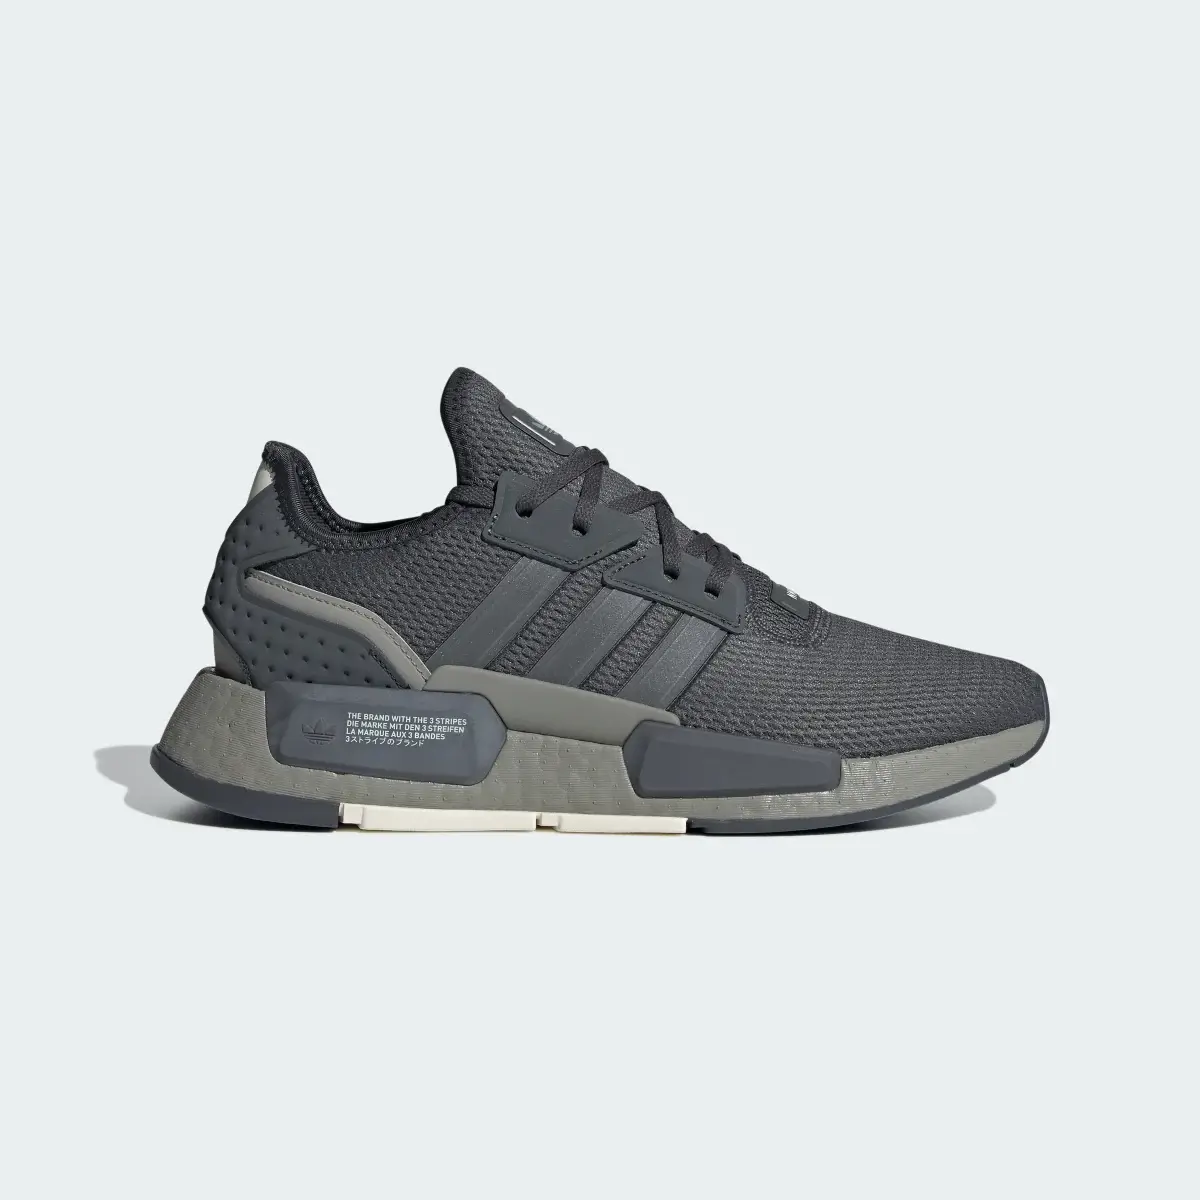 Adidas NMD_G1 Shoes. 2